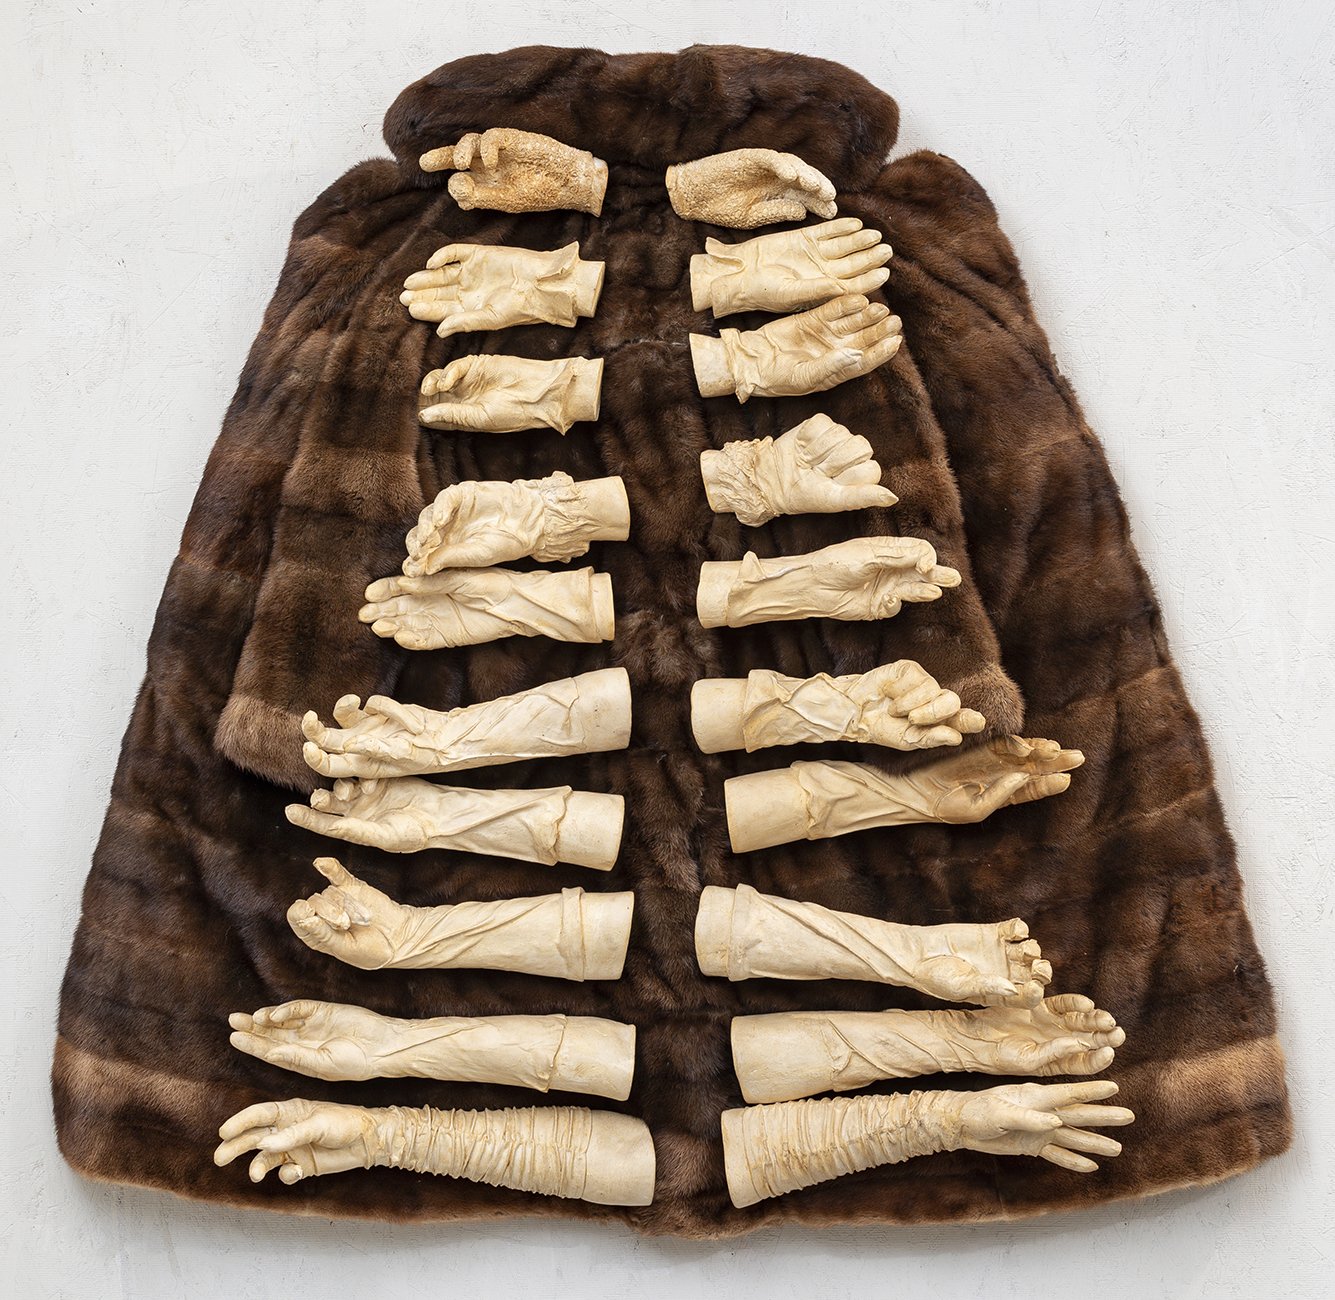  Marsha Pels,  Écorché , 2006-2008. Patined cast plaster, 10 pairs of Pels’ arms cast in her mother’s gloves, her mother’s mink coat. 47 x 47 x 14 inches  